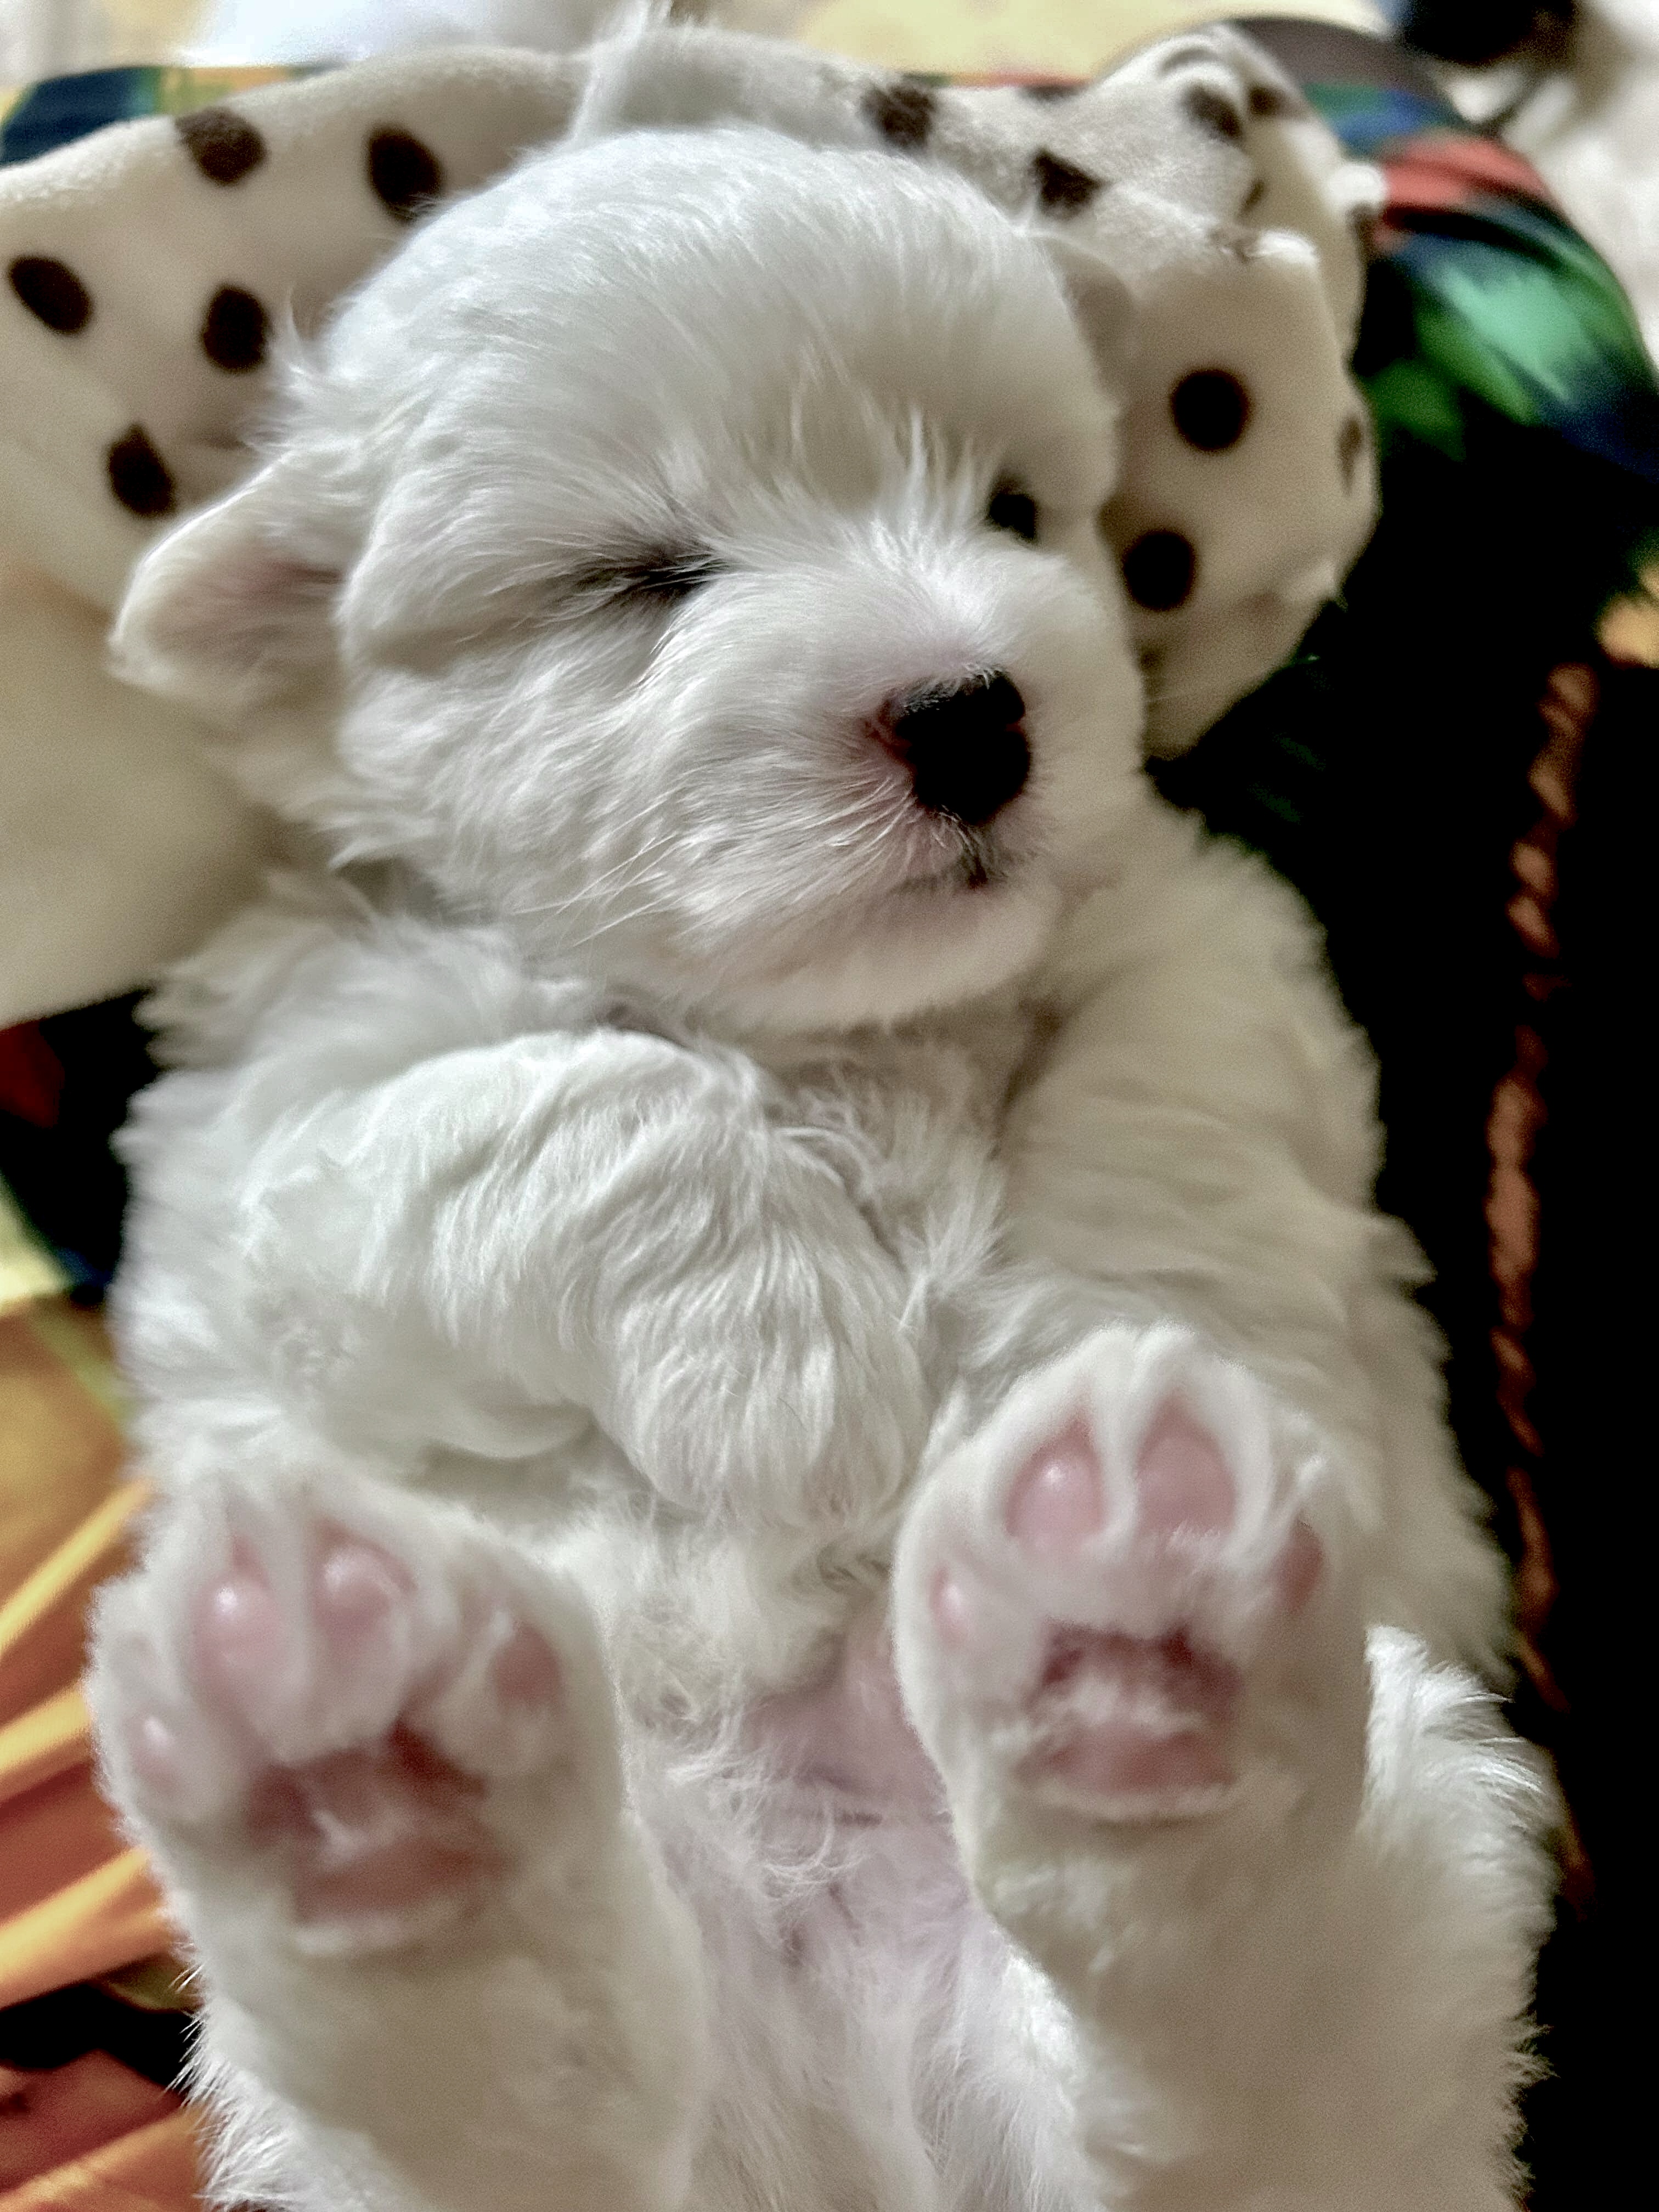 JUST LOOK AT THOSE IRRESISTIBLE PAWS! 🐾💙🥰